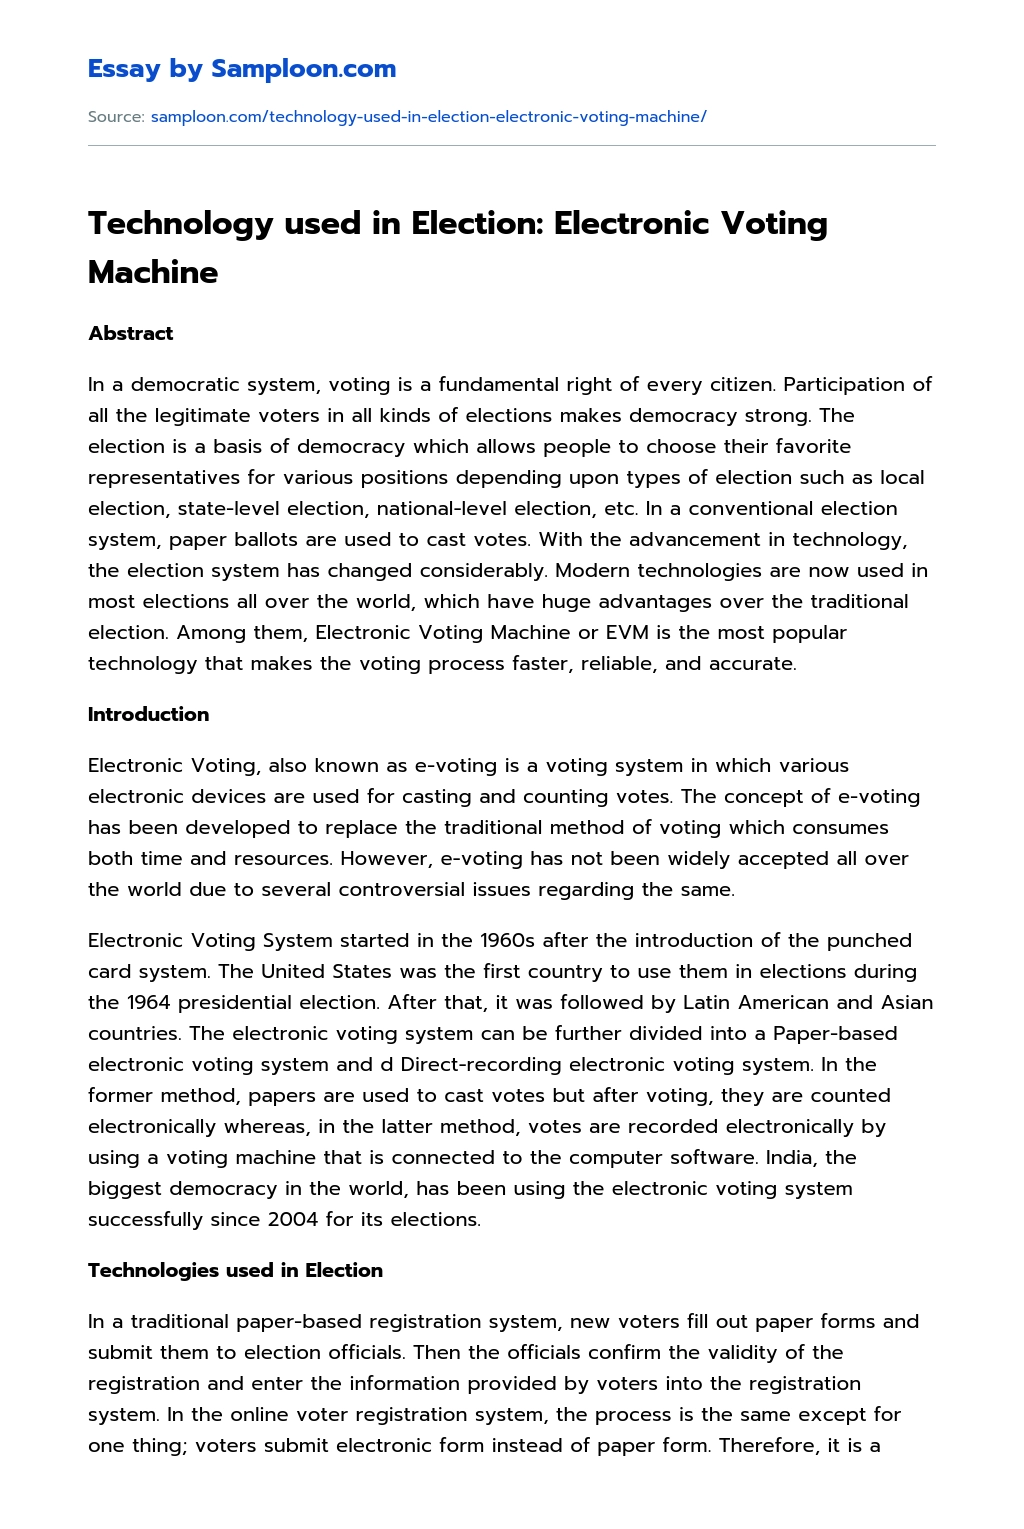 Technology used in Election: Electronic Voting Machine essay